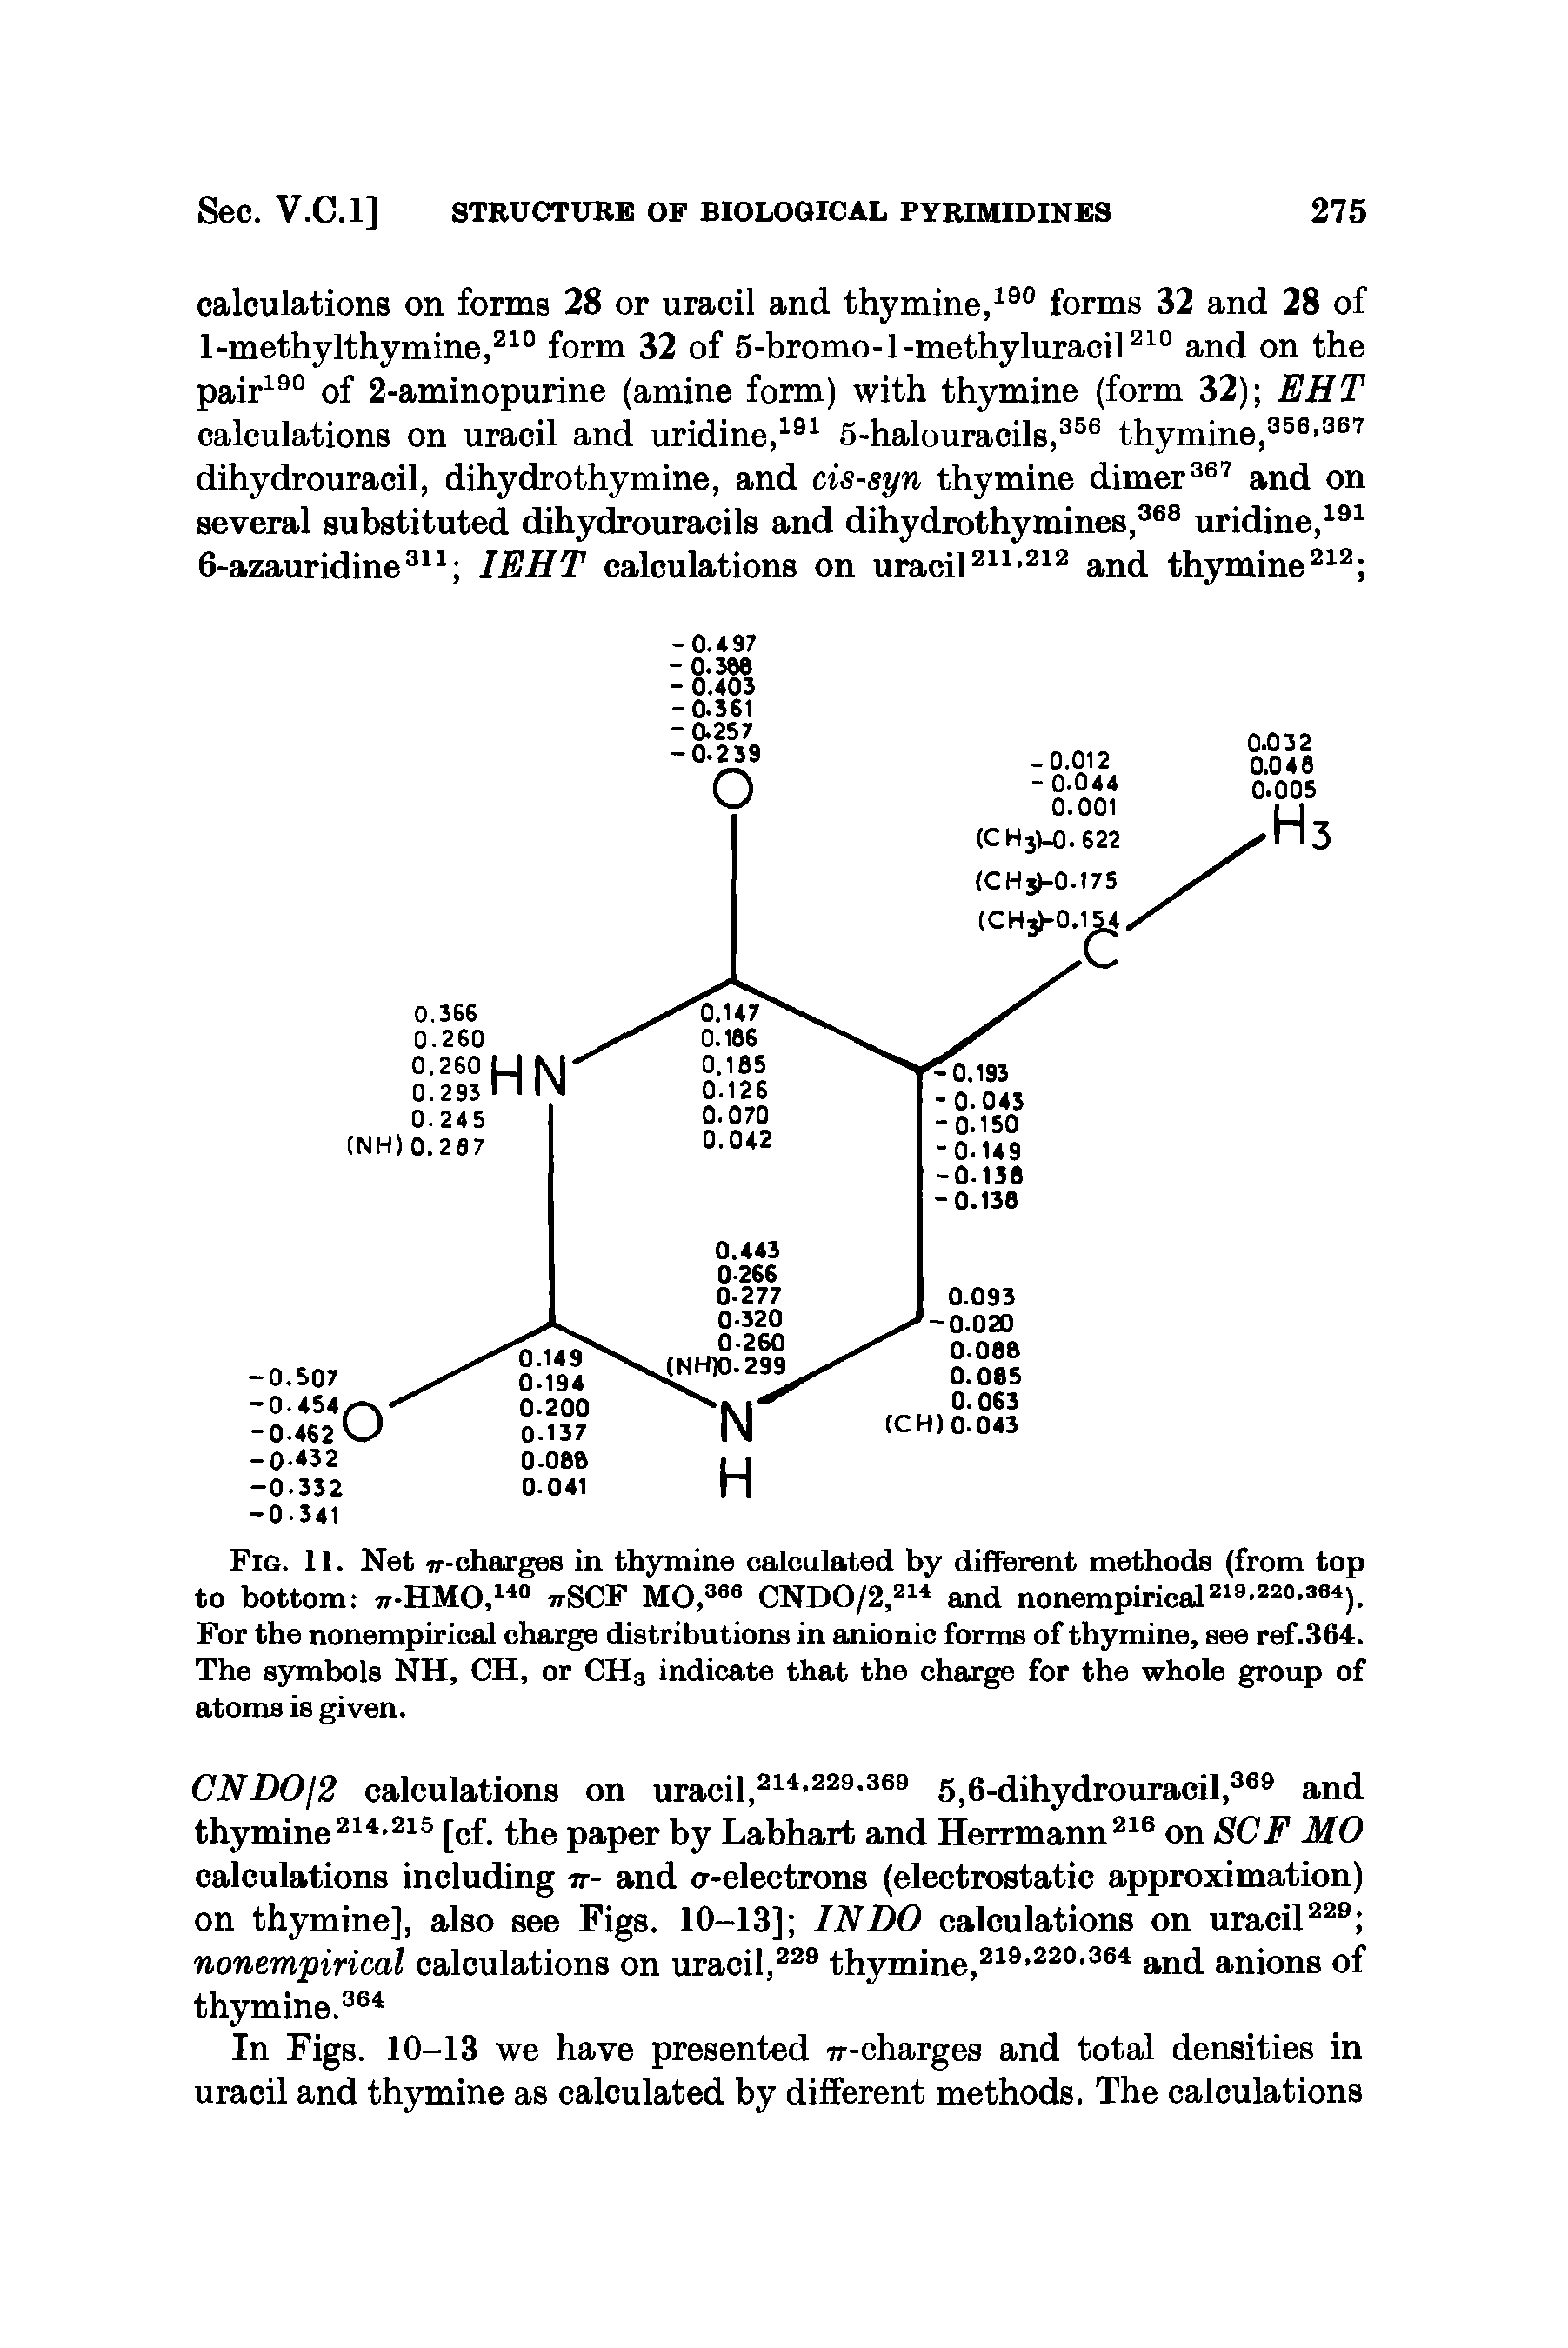 Fig. 11. Net w-charges in thymine calculated by different methods (from top to bottom w-HMO,140 wSCF MO,388 CNDO/2,214 and nonempirical219,220,384). For the nonempirical charge distributions in anionic forms of thymine, see ref.364. The symbols NH, CH, or CH3 indicate that the charge for the whole group of atoms is given.